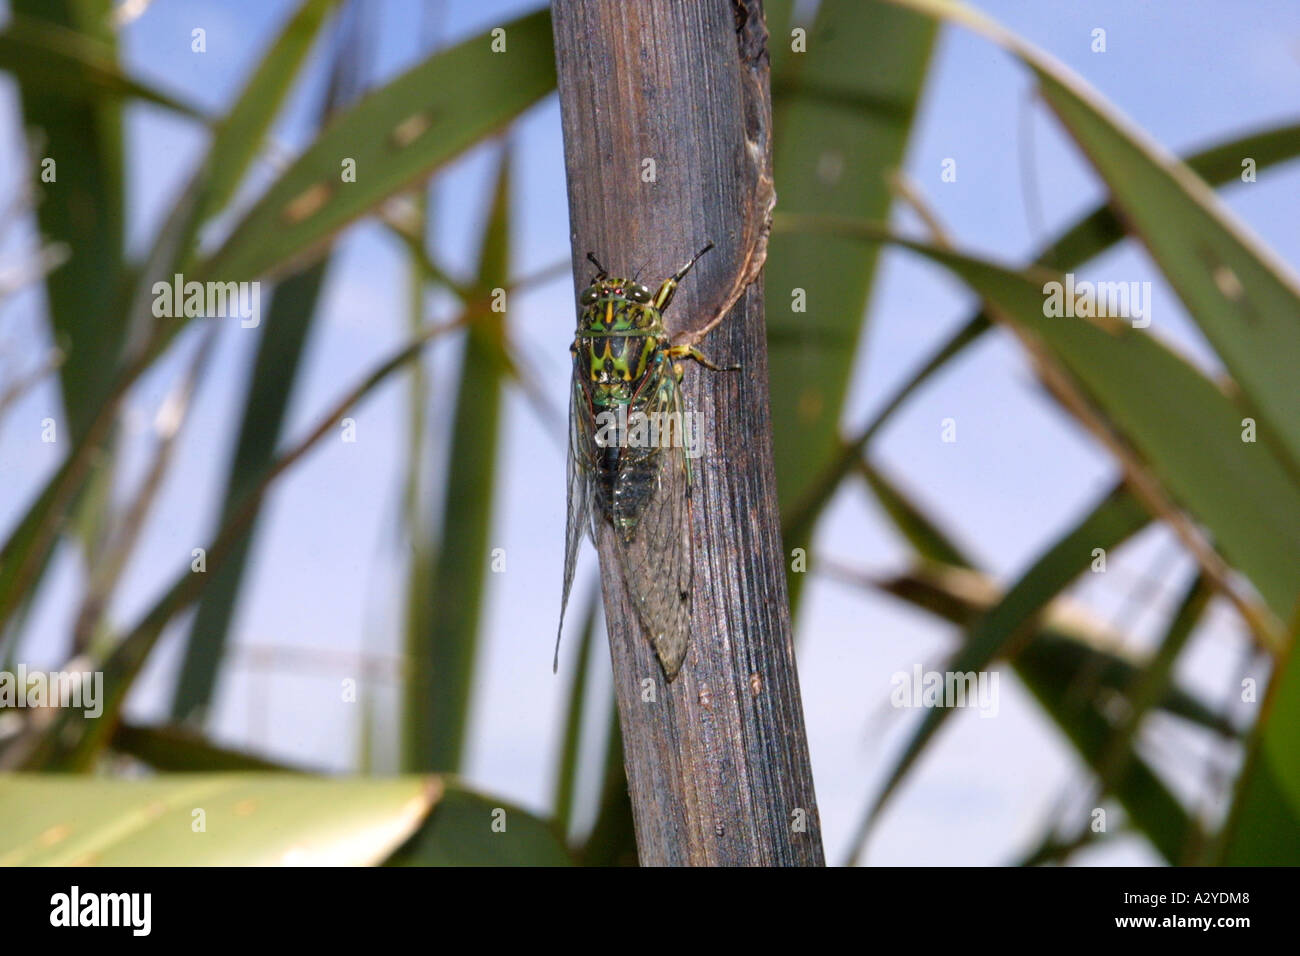 Cicada on branch with flax leaves in the background, New Zealand Stock Photo